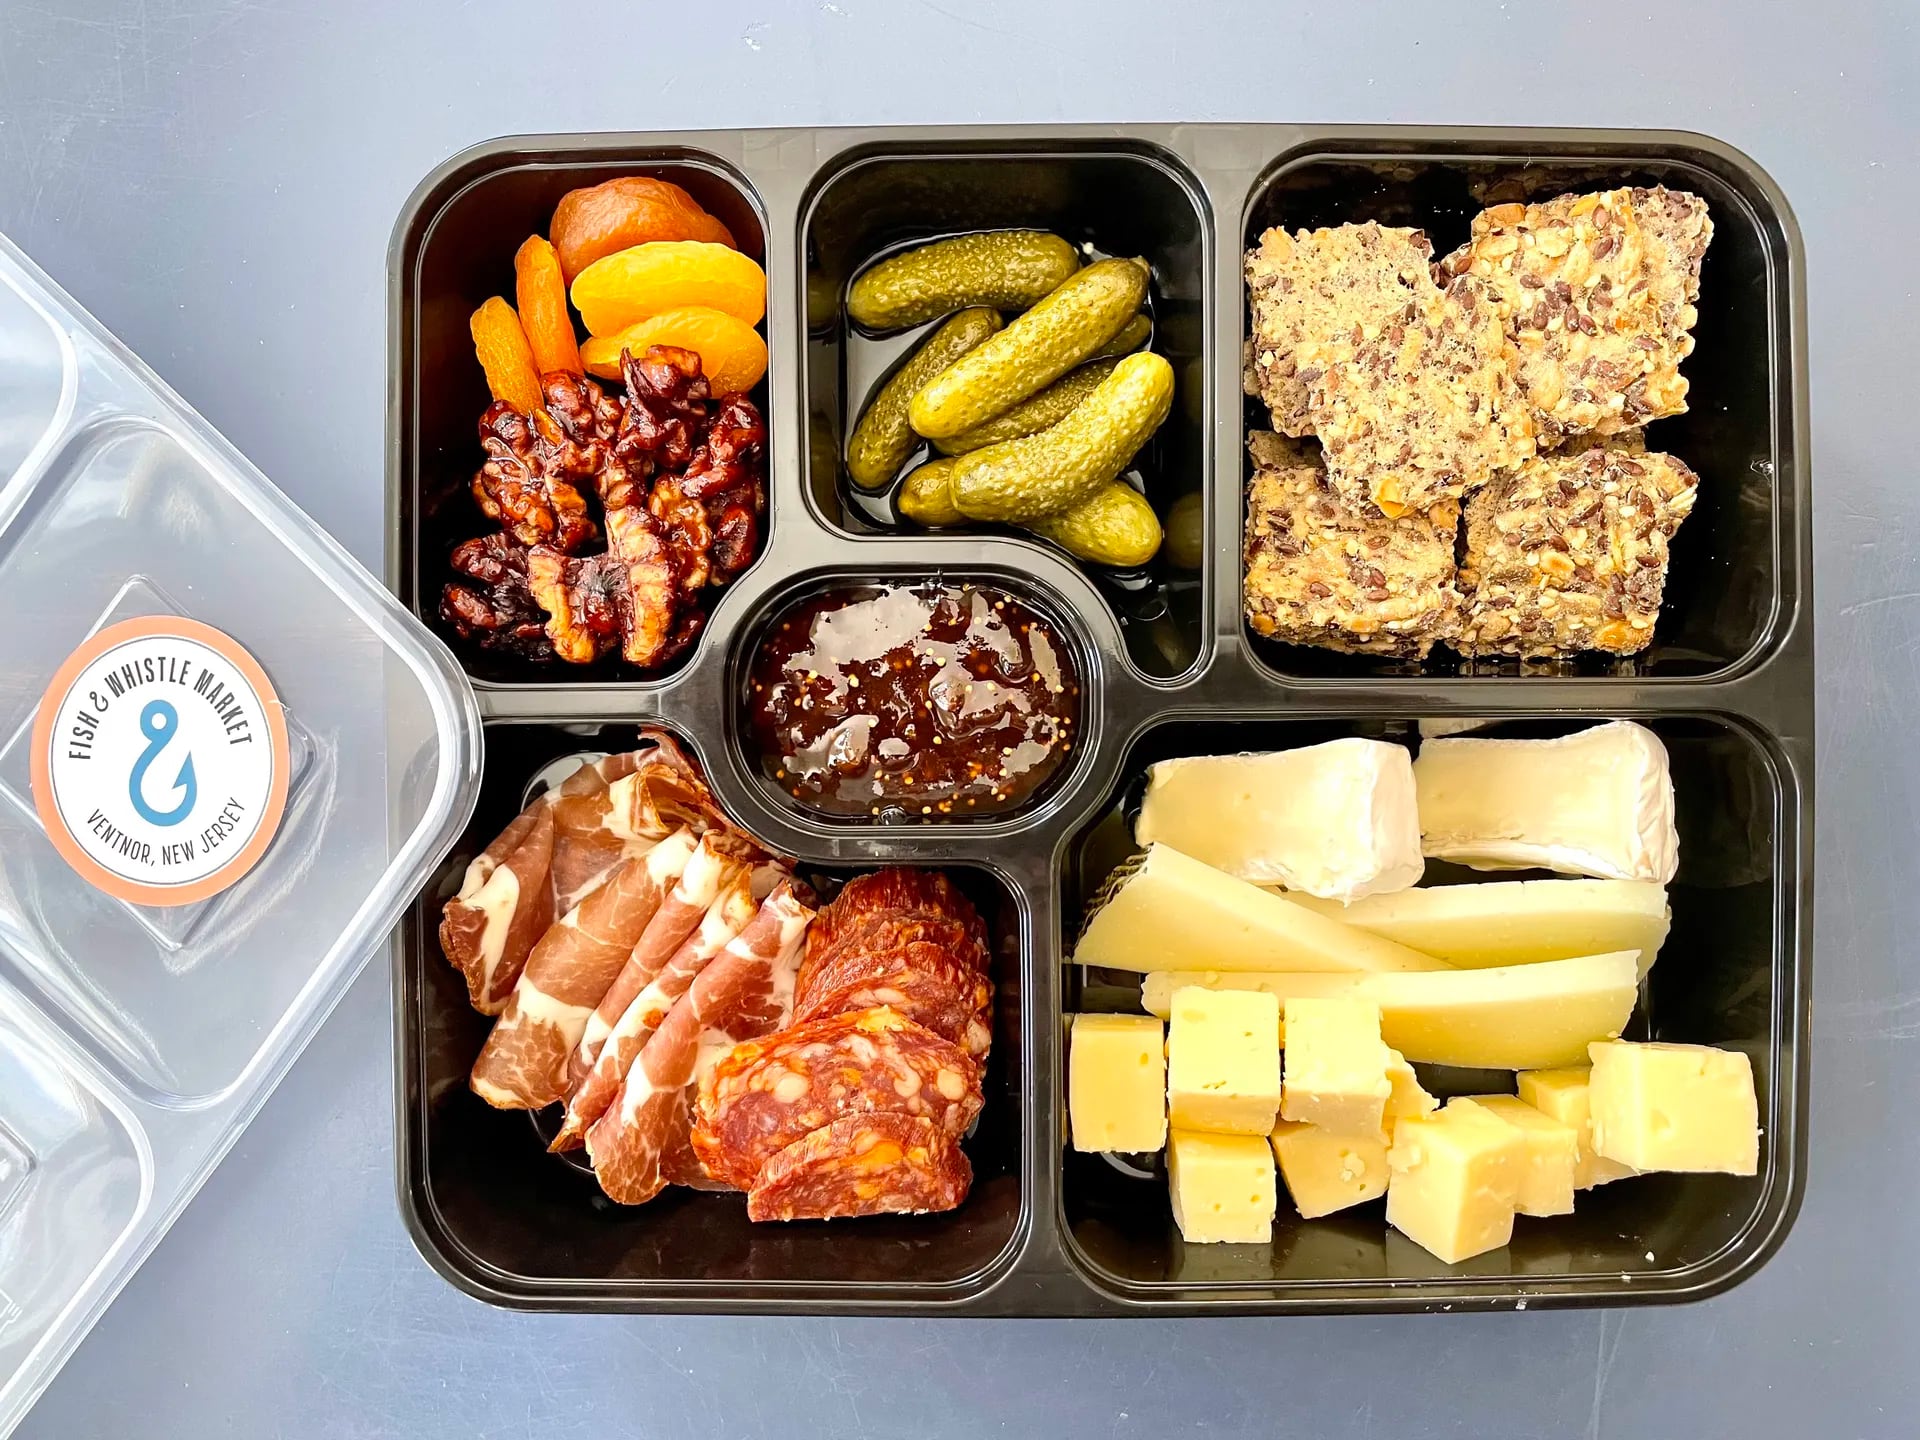 A Snackle Box from Fish & Whistle Market in Ventnor City features cured meats and artisan cheeses with gluten-free crackers, fig jam pickles, and mustard for a charcuterie board to-go.